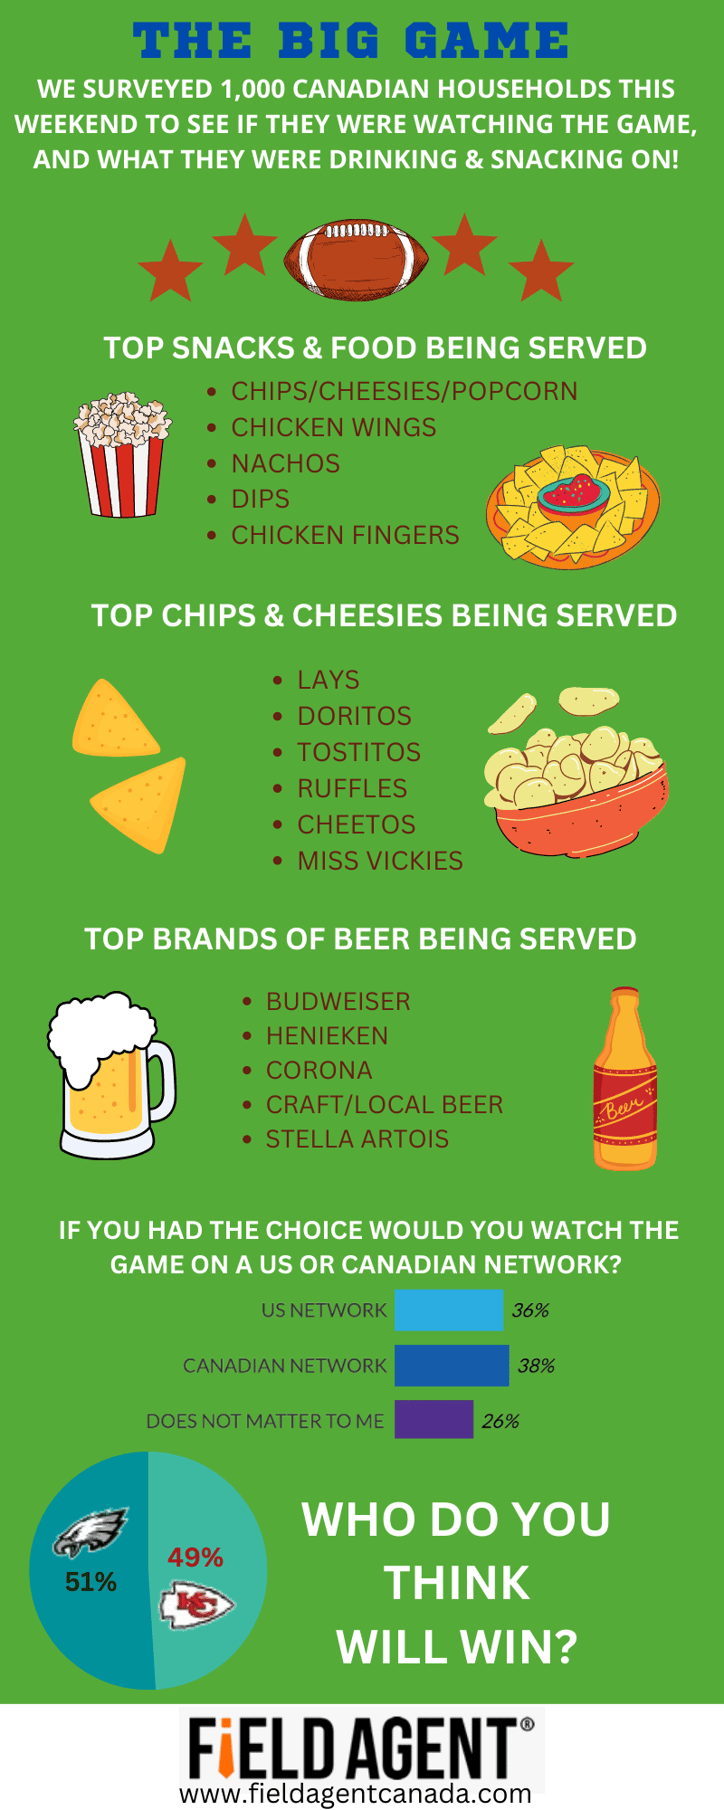 We were wondering what Canadians were drinking and snacking on during the Big Game on Sunday so we surveyed xxxx Canadian households to see if they were watching the game and what they were snacking on during the gam